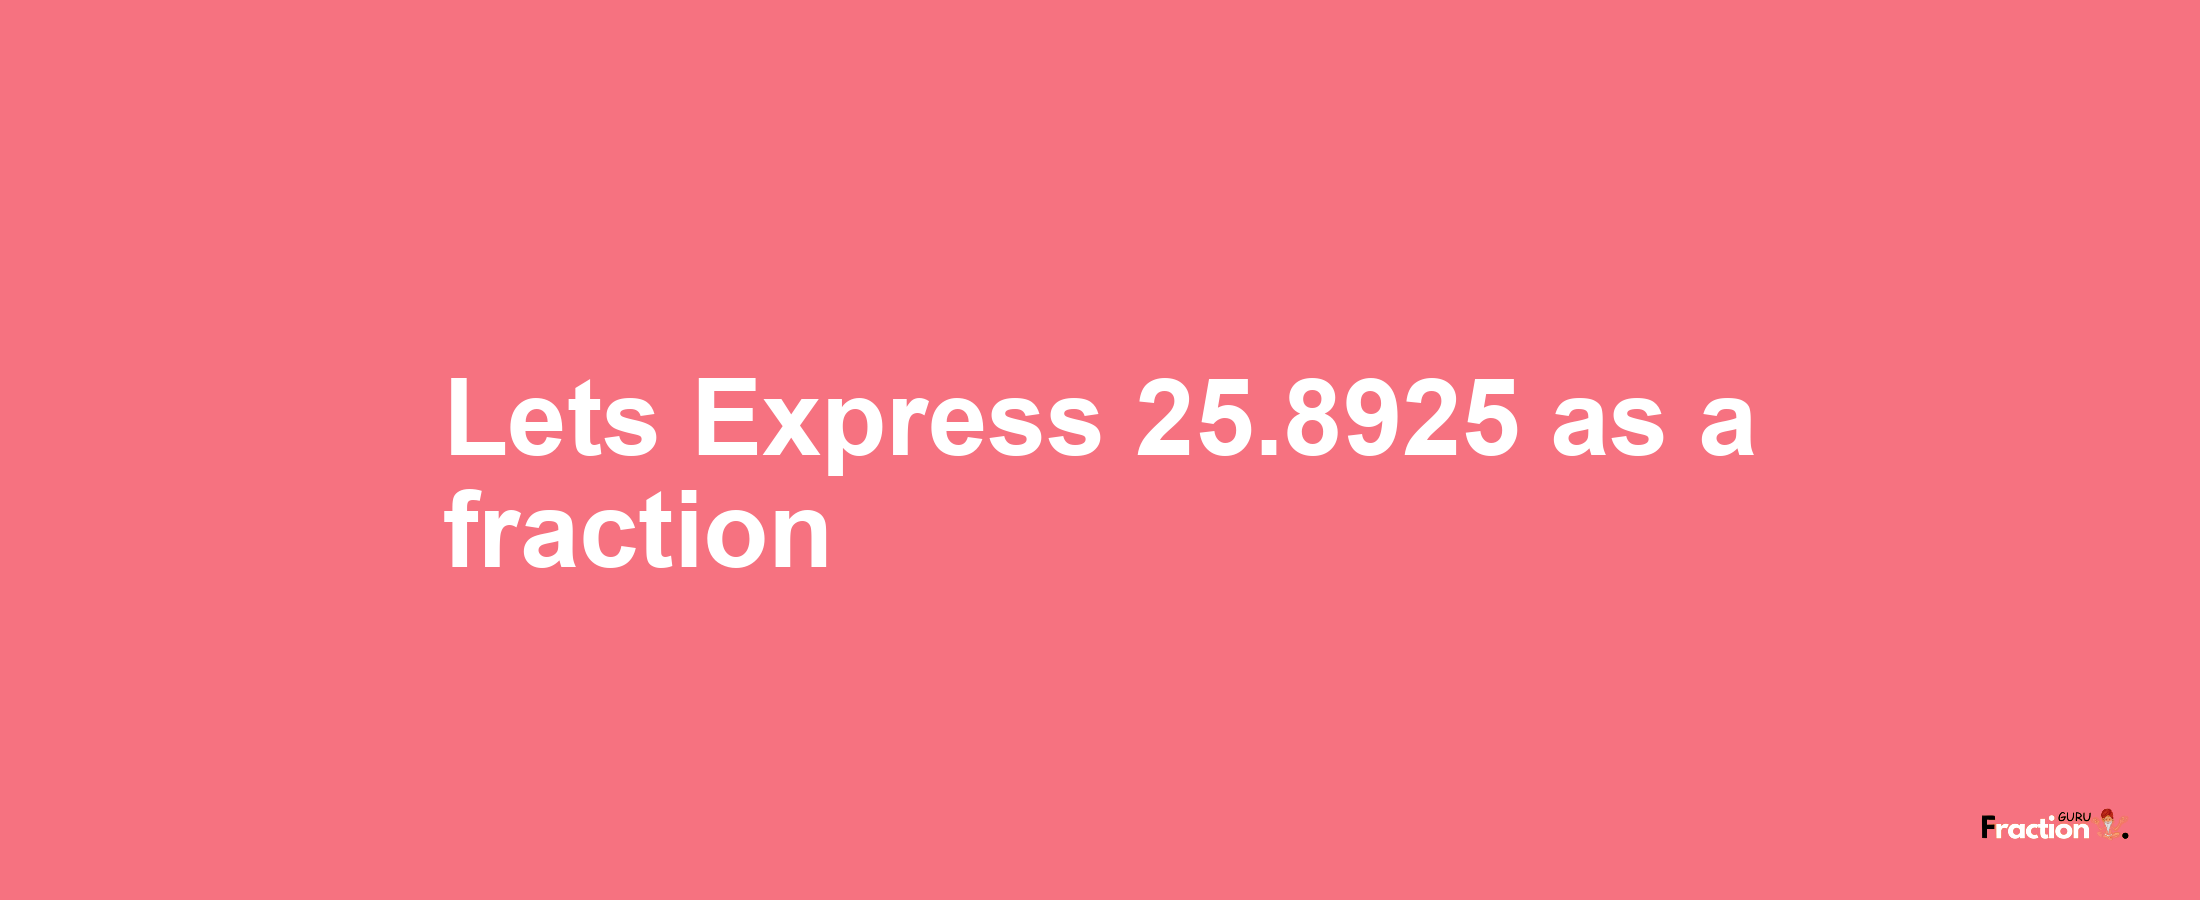 Lets Express 25.8925 as afraction